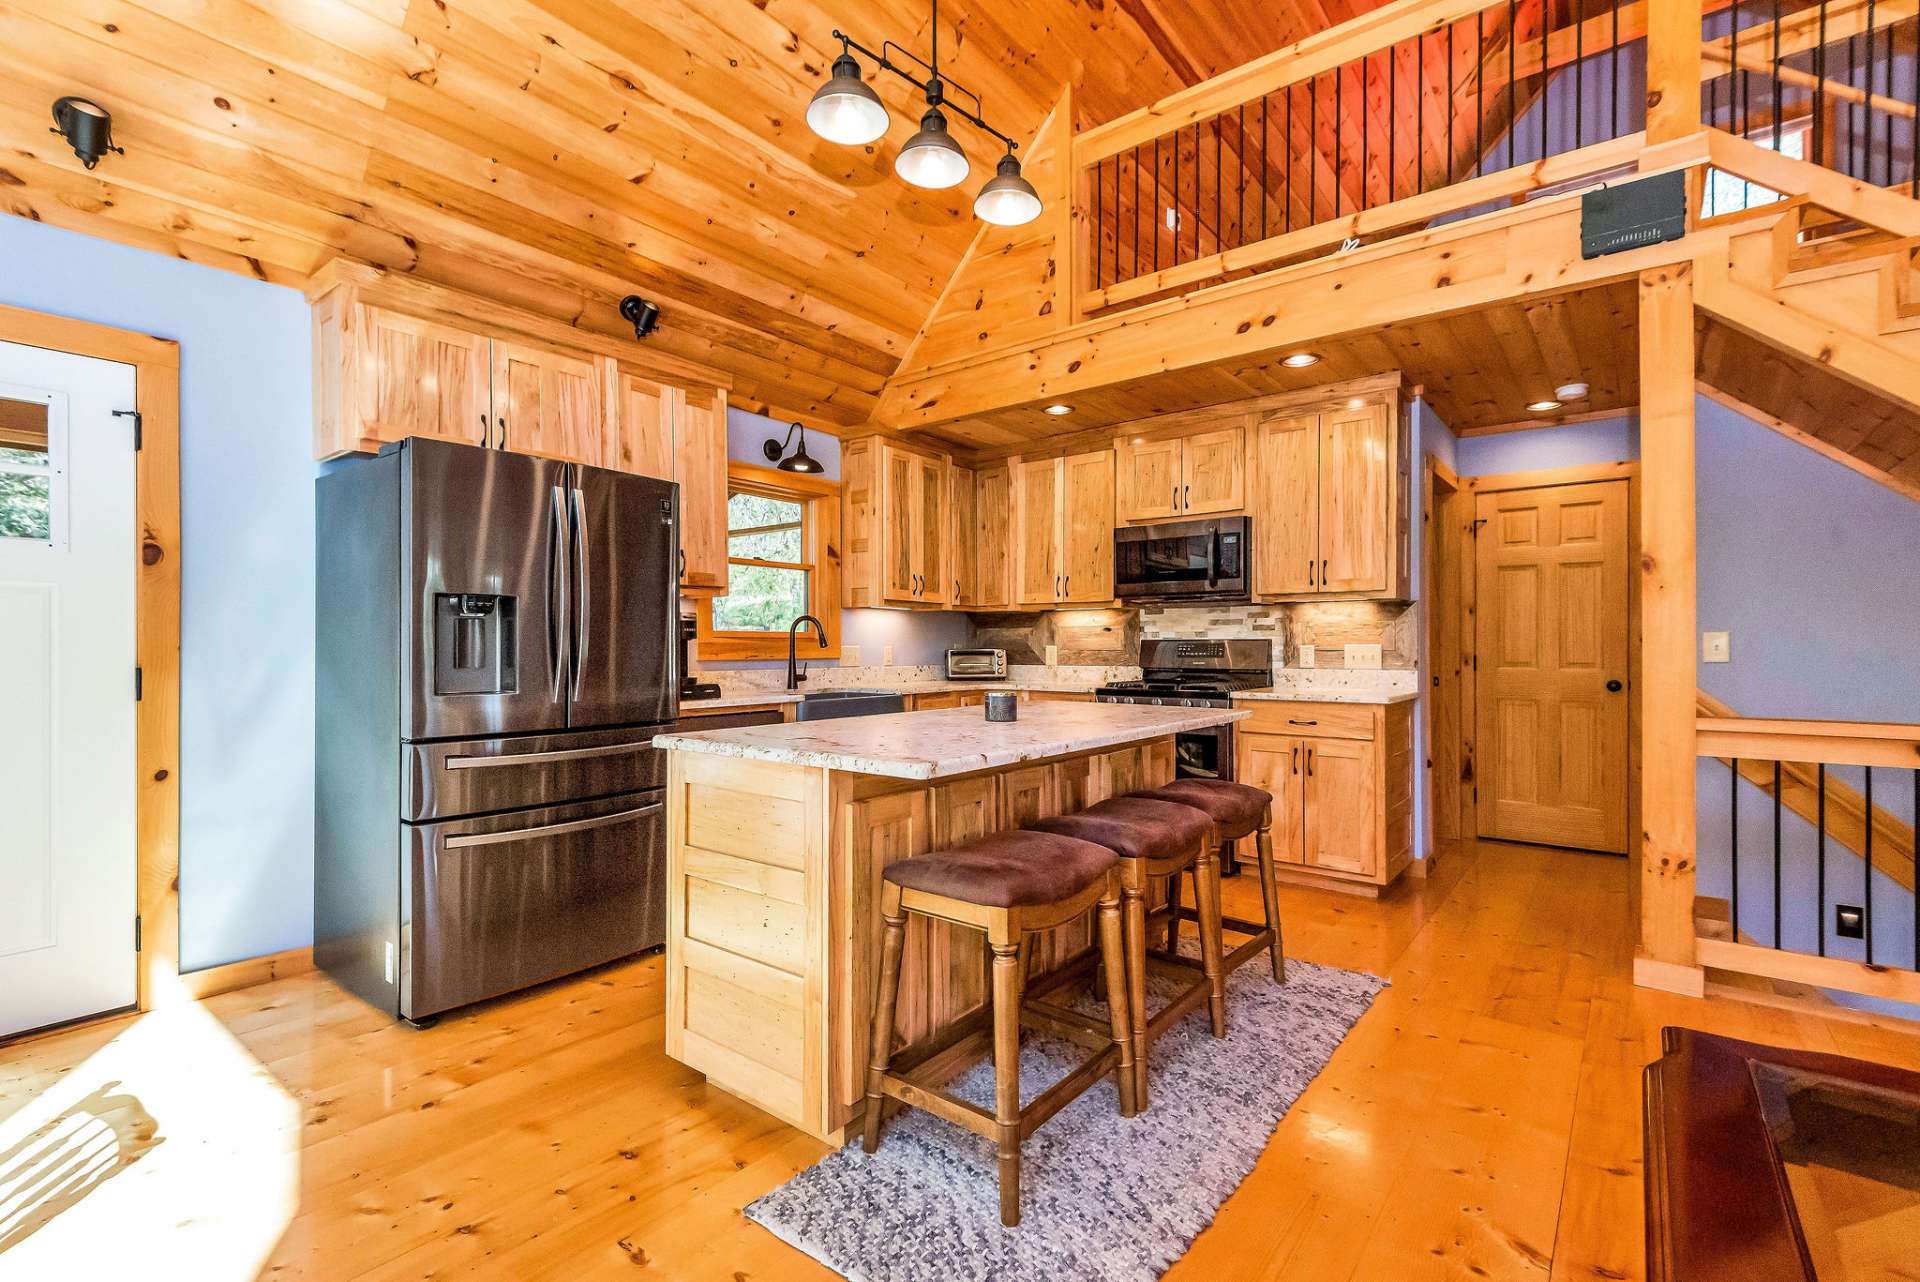 The kitchen strikes the perfect balance between rustic charm and modern convenience, providing a stylish and functional space where cooking, dining, and socializing harmonize effortlessly.